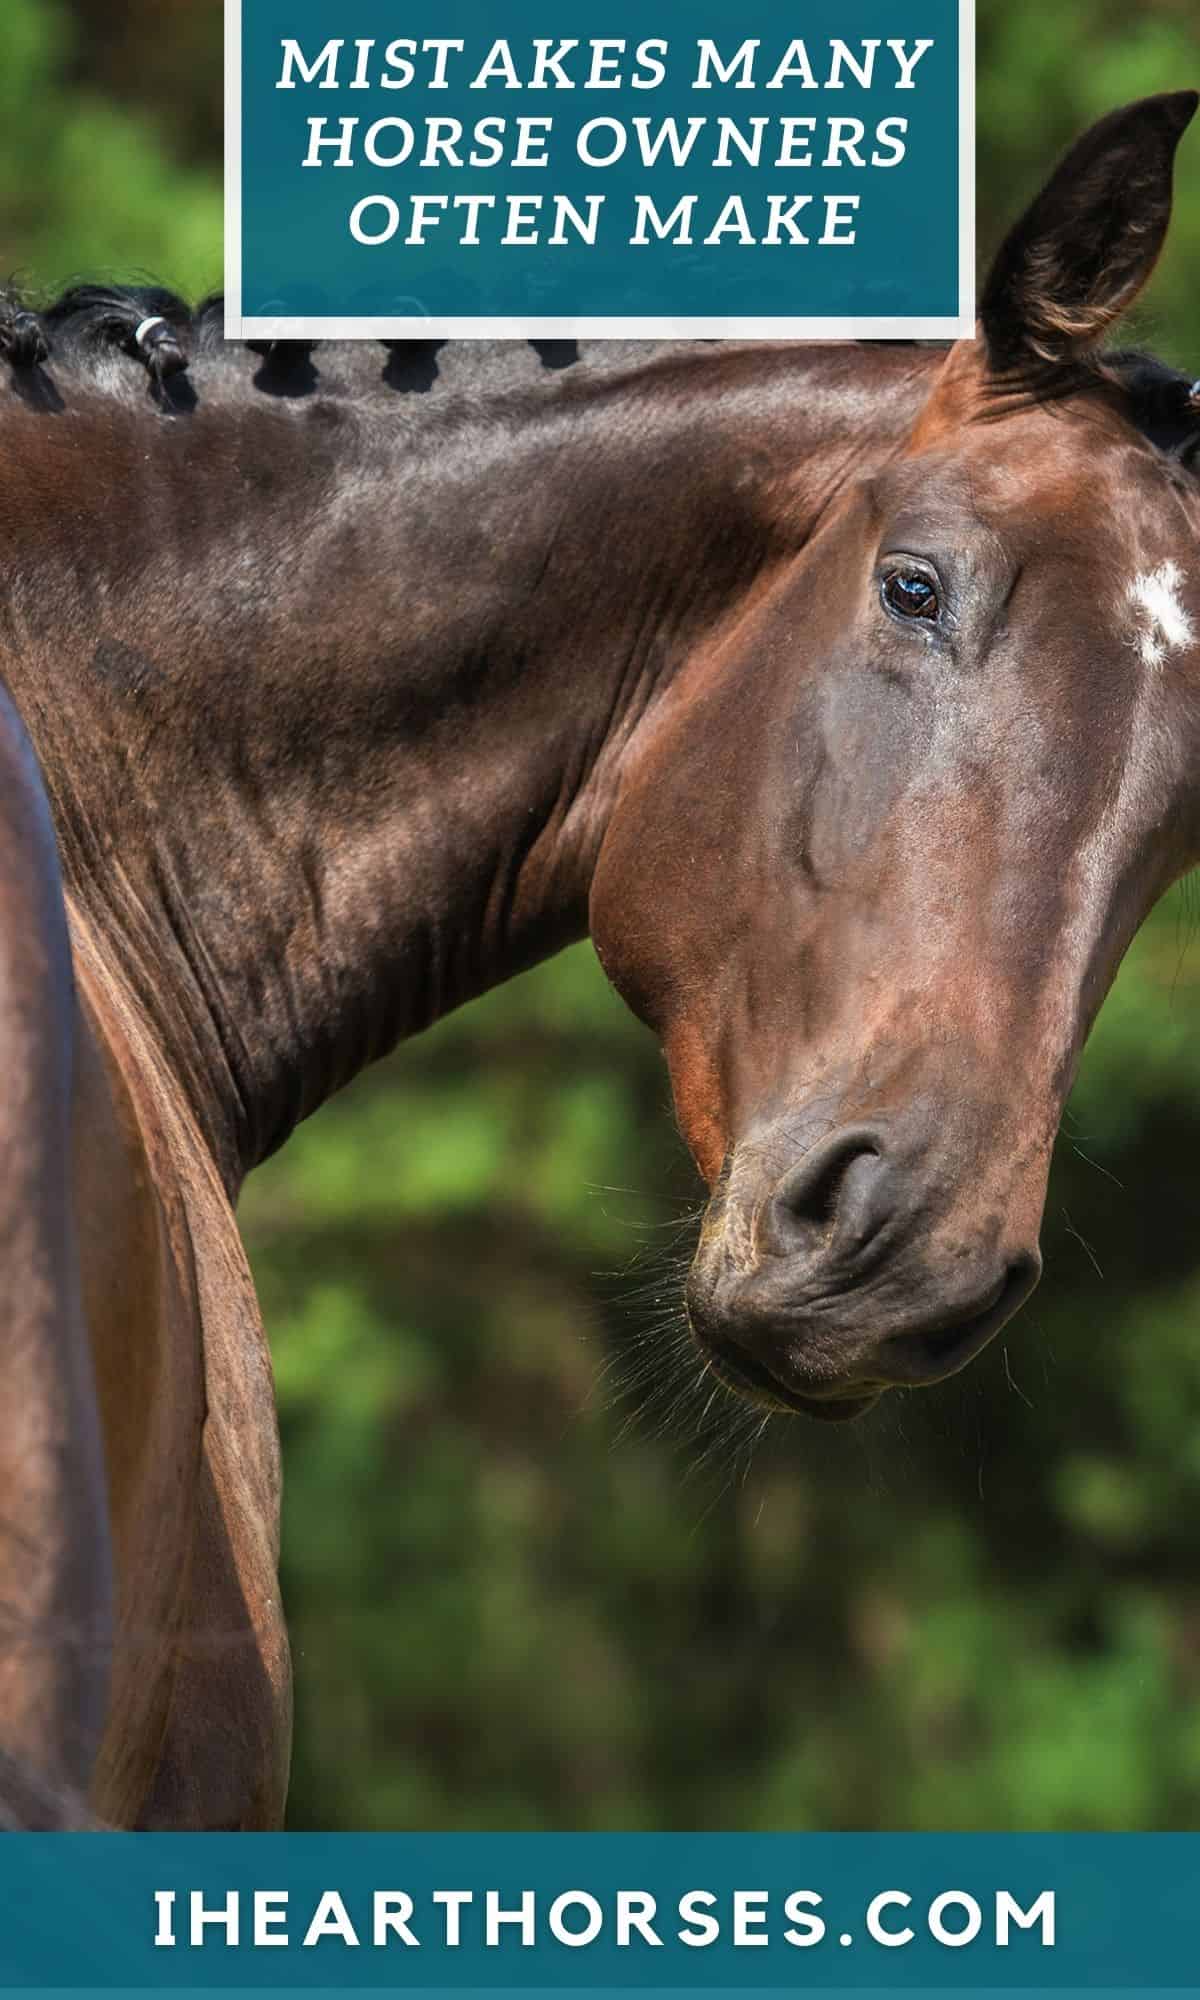 Brown horse with braided mane looking toward camera